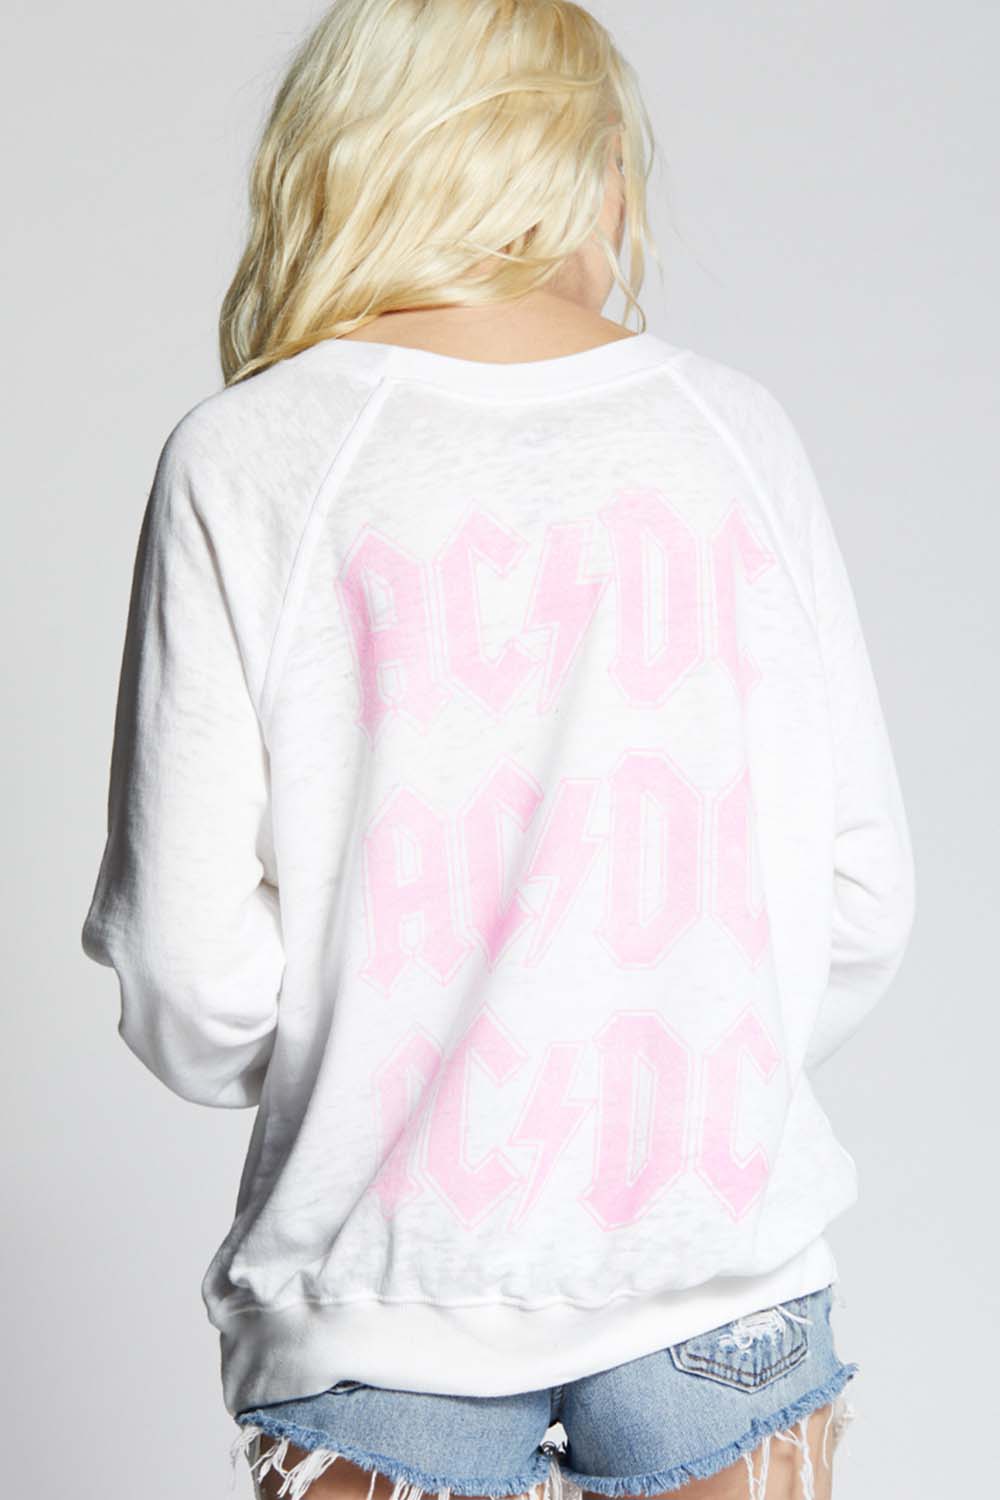 ACDC Bolt Pink Sweater